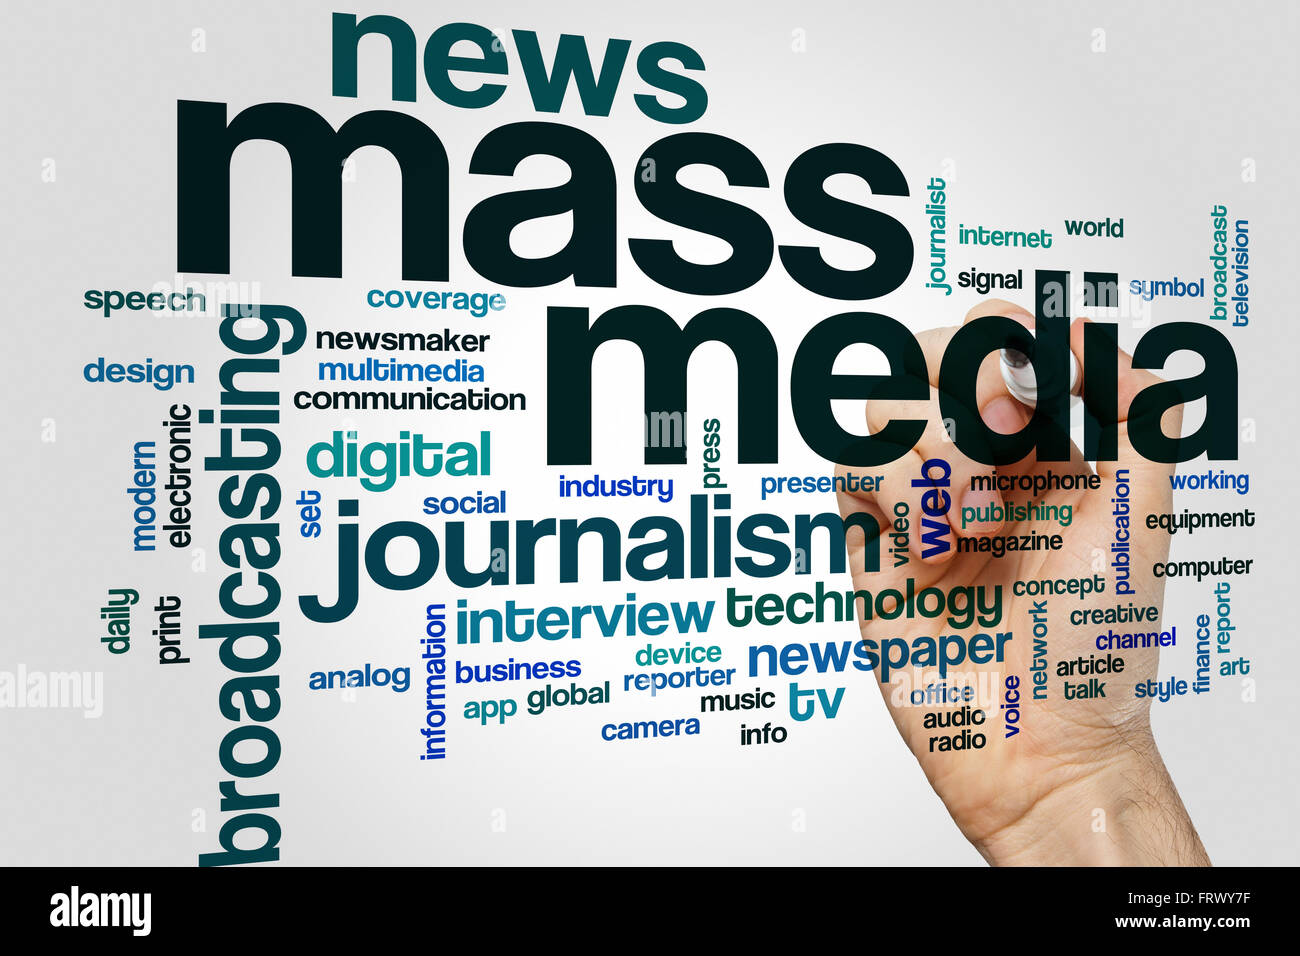 Mass media word cloud concept with journalism news related tags Stock Photo